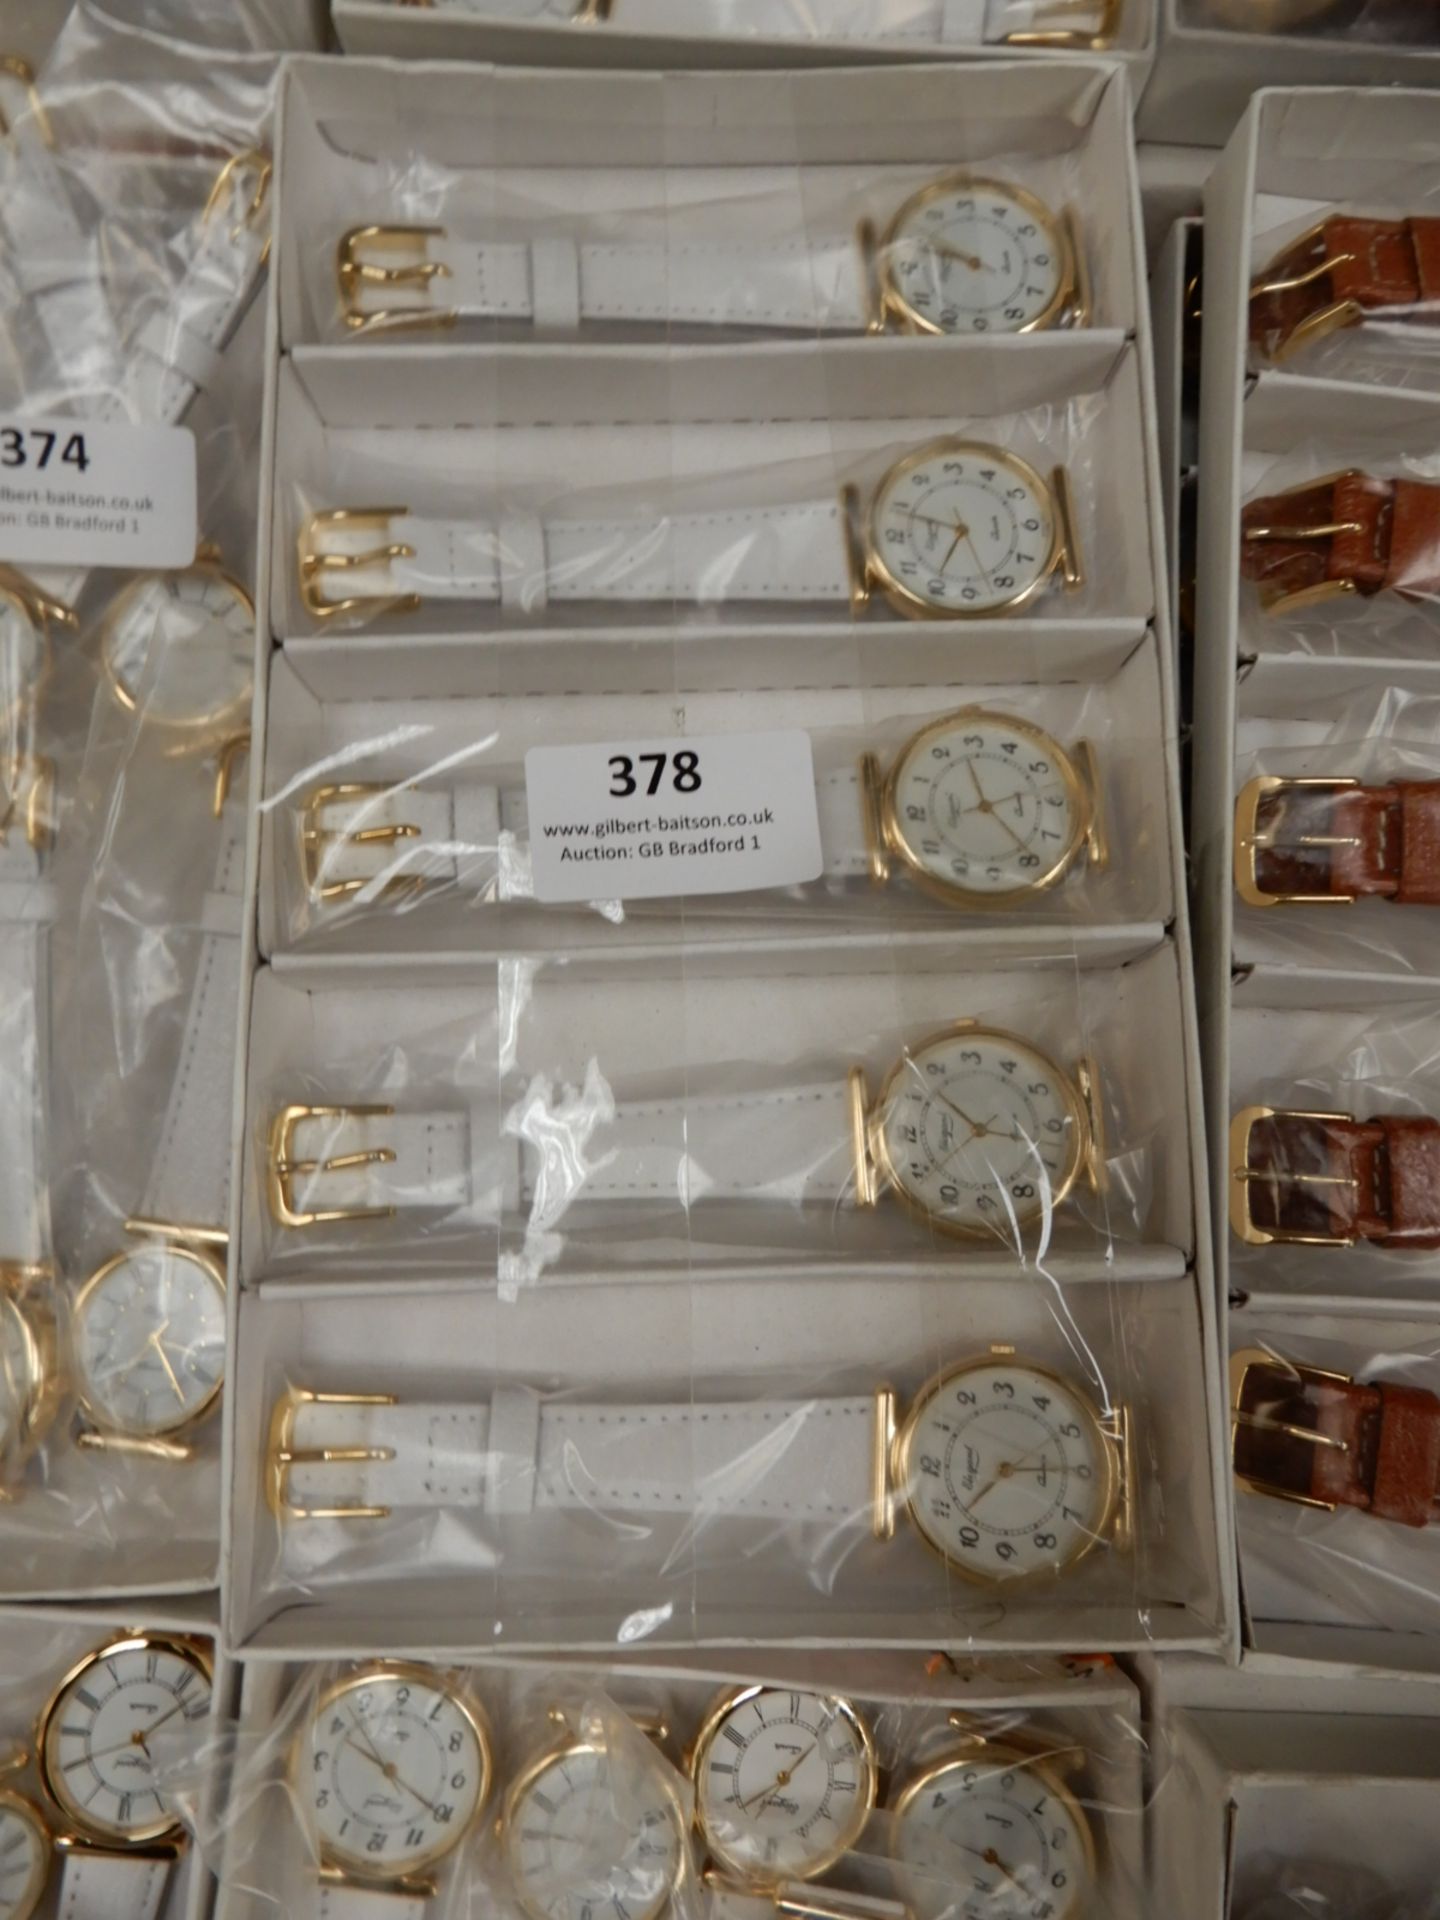 Box Containing 10 Ladies Fashion Watches with Whit